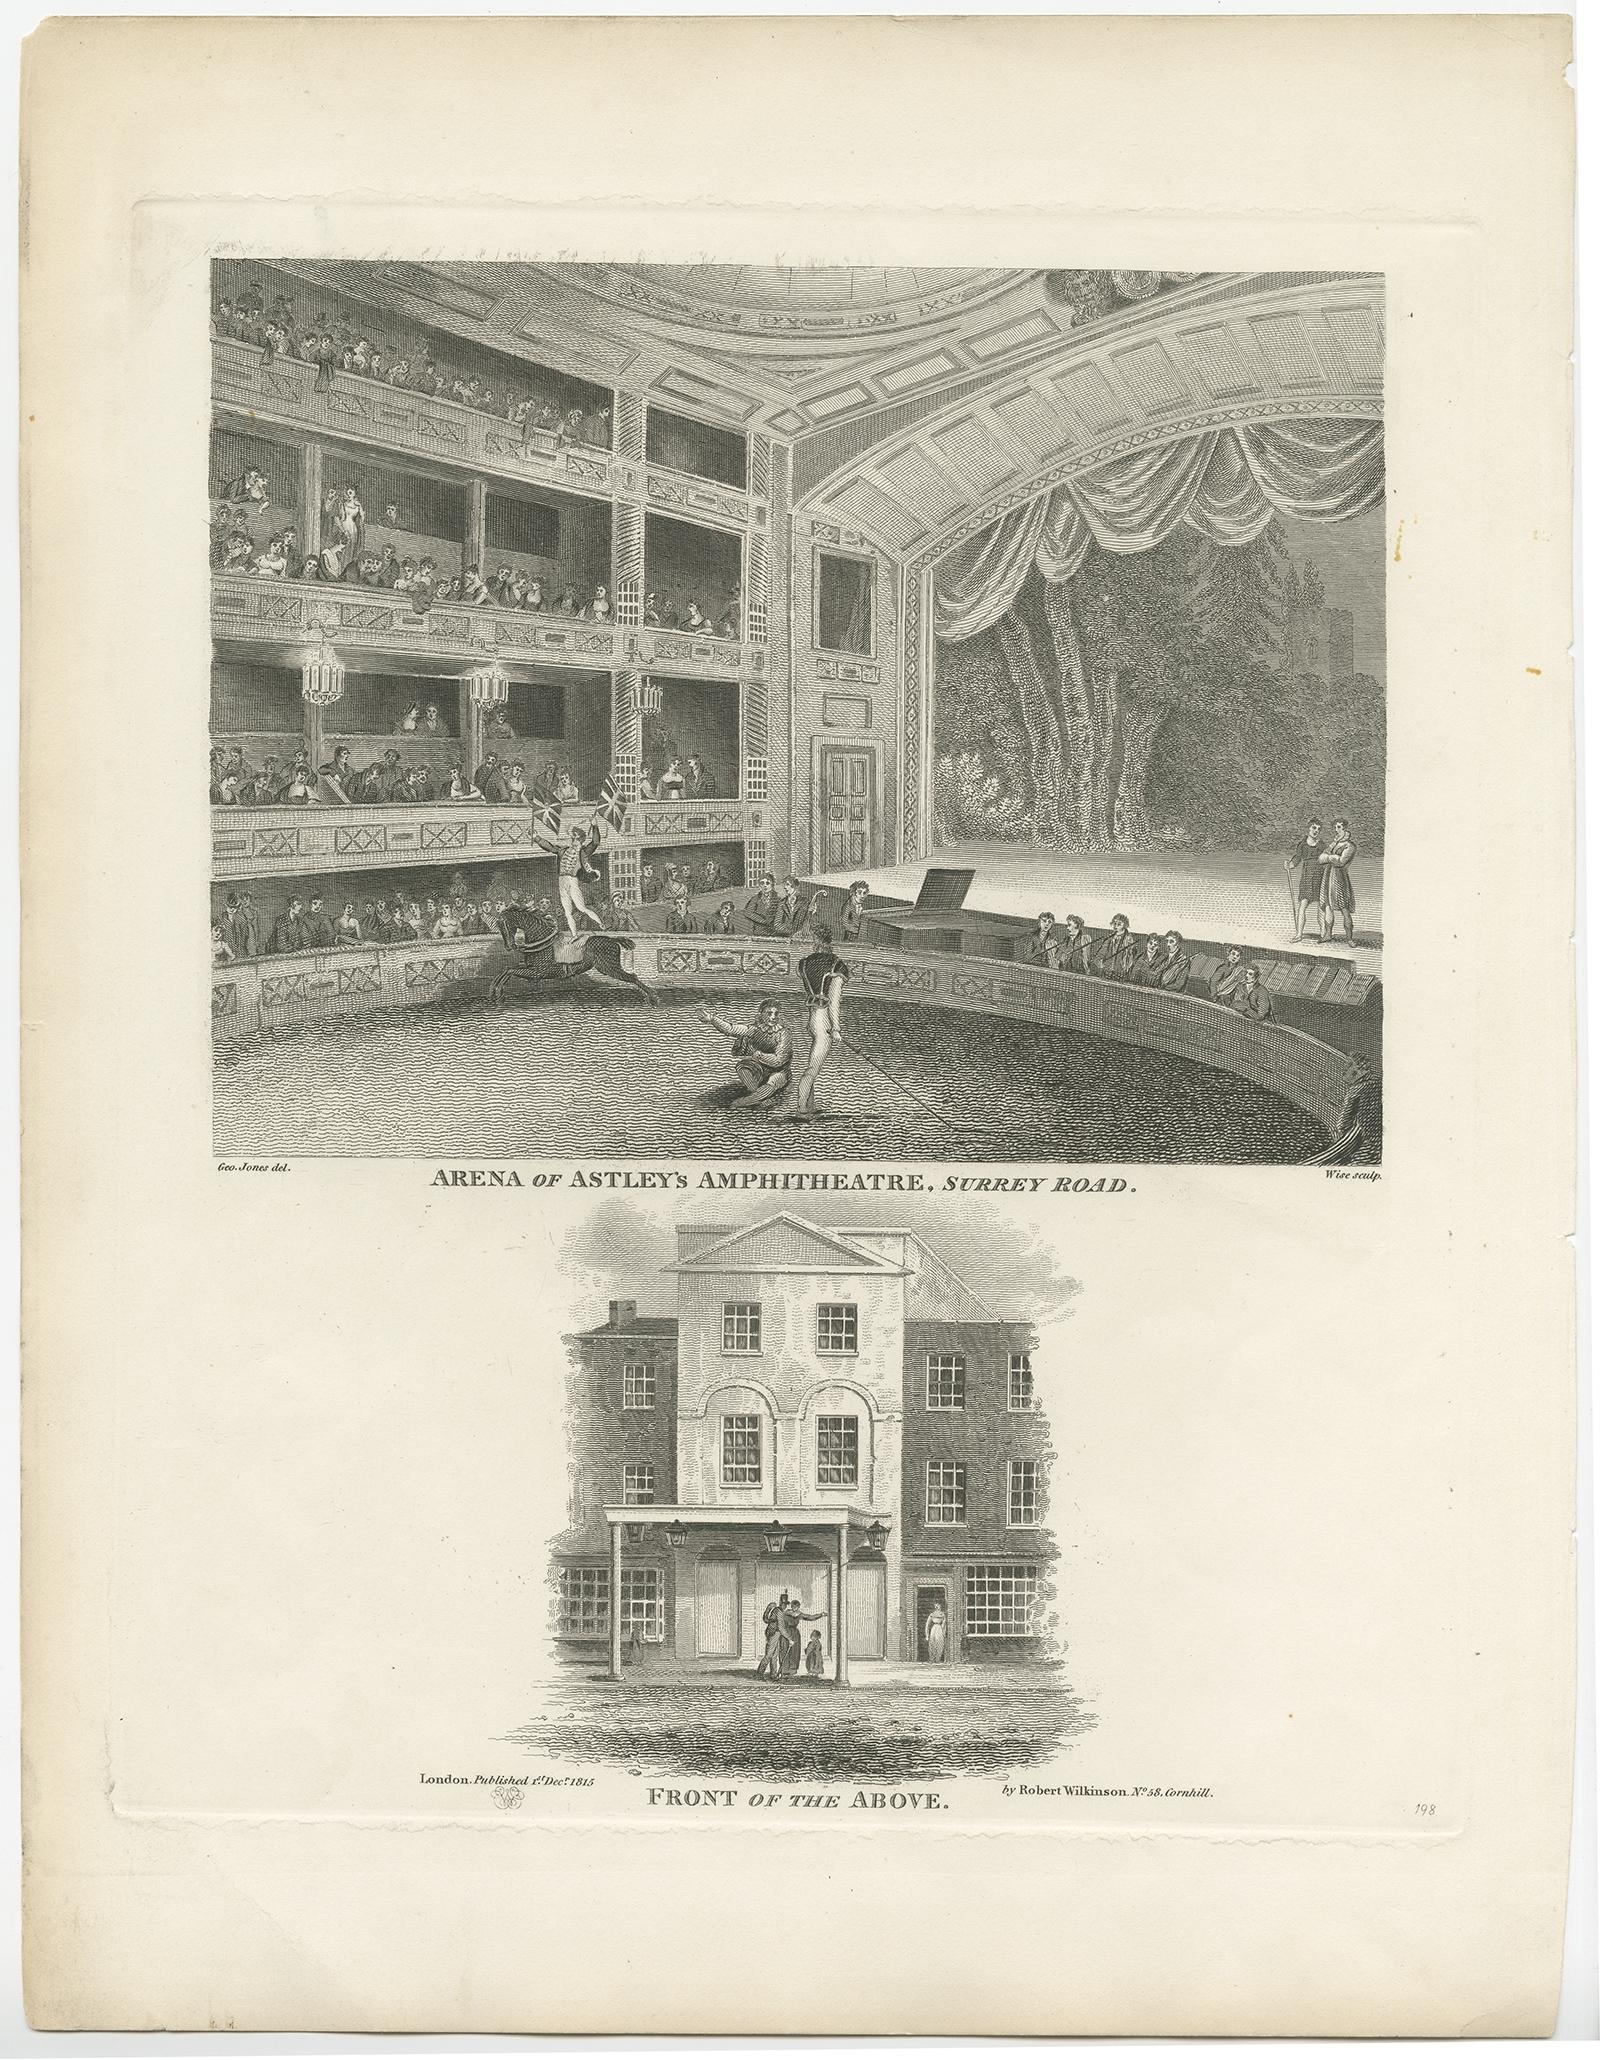 Description: Antique print titled 'Arena of Astley's Amphitheatre'. 

Arena and facade of Astley's Amphitheatre, the 1804 building, which was demolished in the 1890s, stood south of Westminster Bridge. A circus ring is shown in the position of the